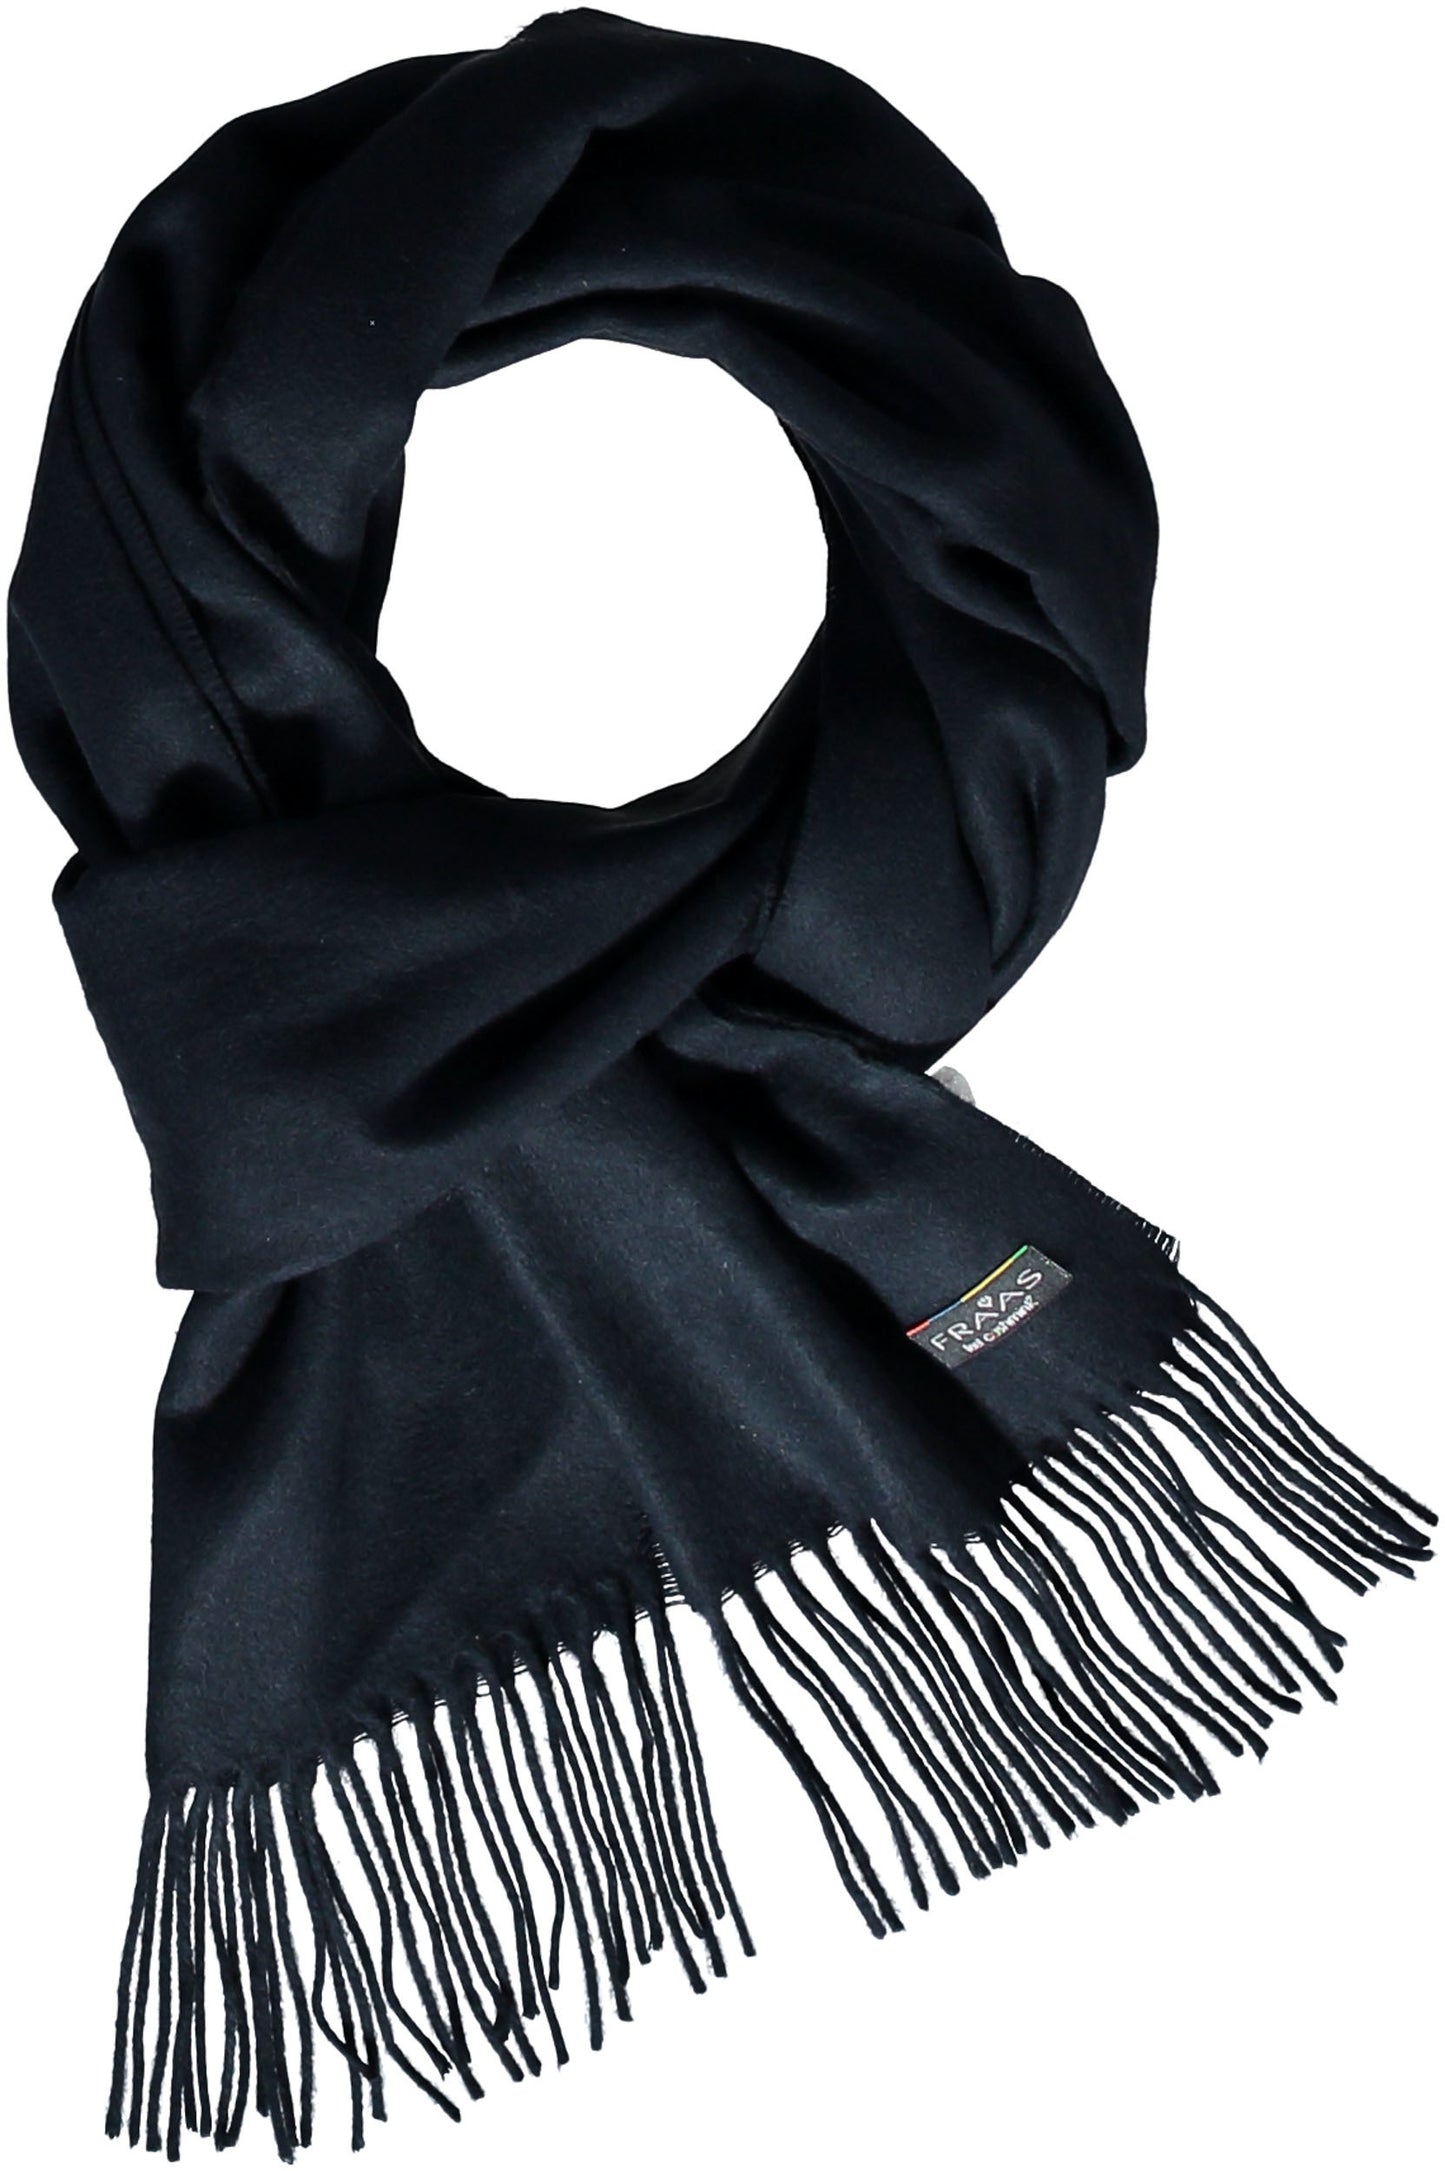 Navy scarf by Fraas